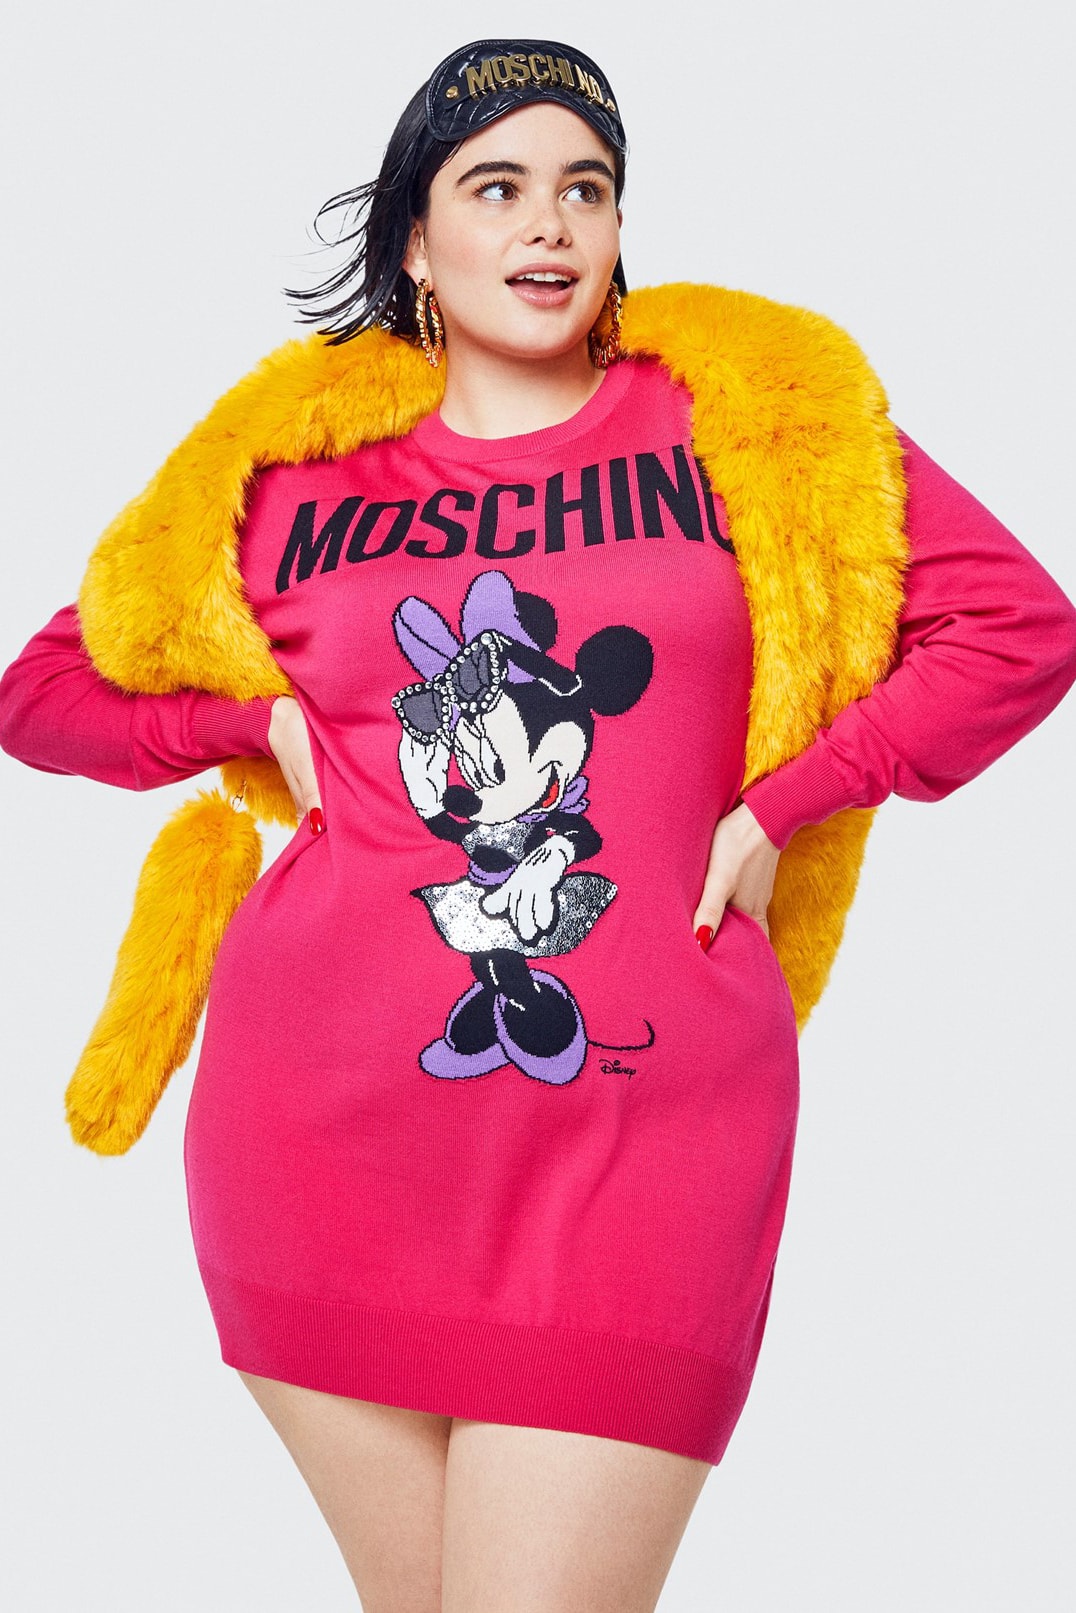 Moschino H&M Collection Lookbook Barbie Ferreira Minnie Mouse Sweater Pink